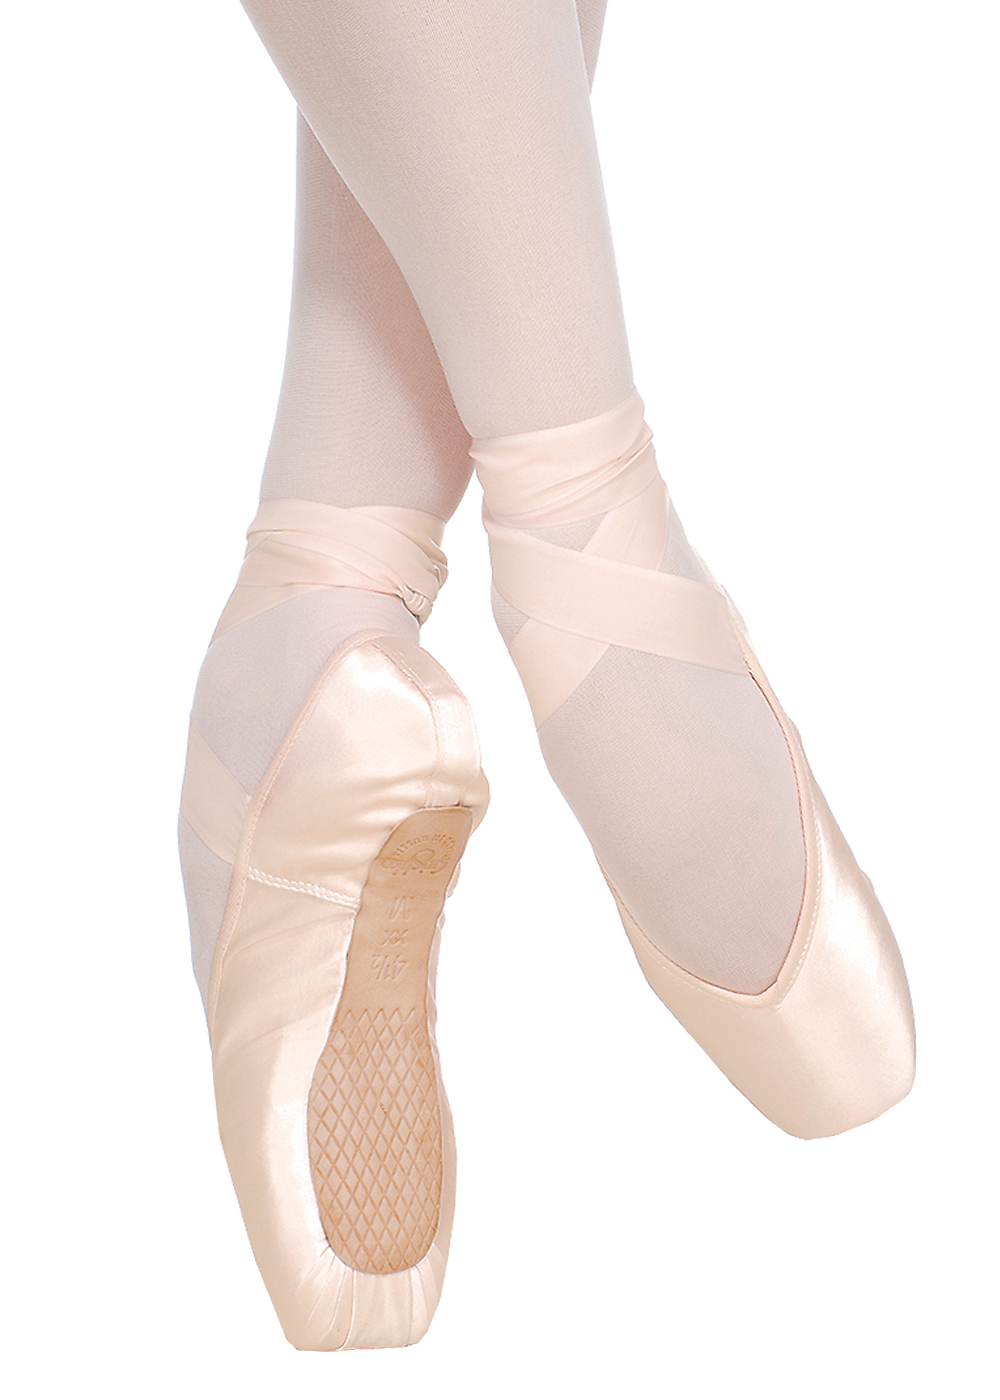 Grishko Fouette Pointe Shoes - Straight 